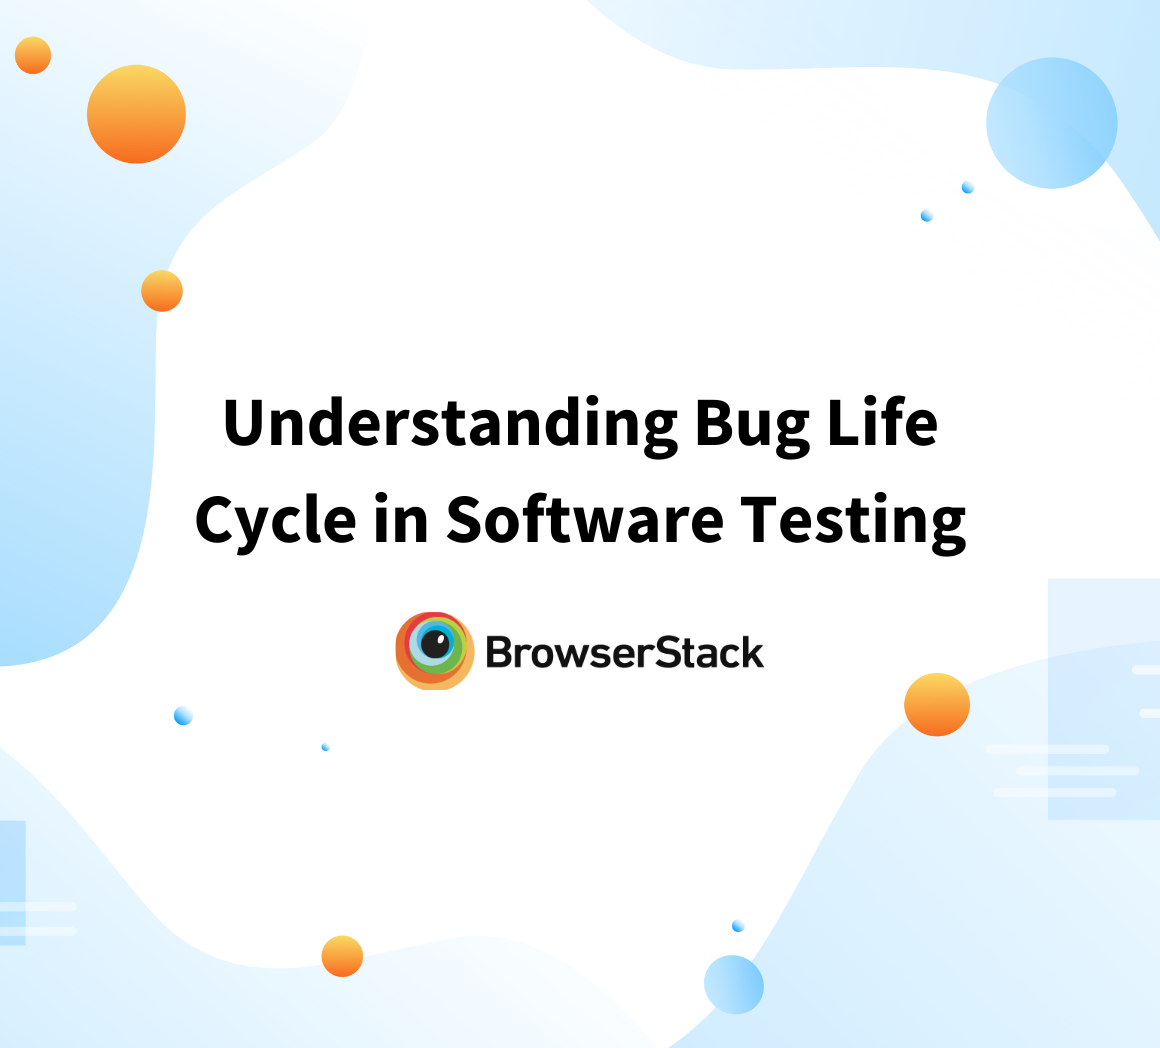 Understanding Bug Life Cycle in Software Testing